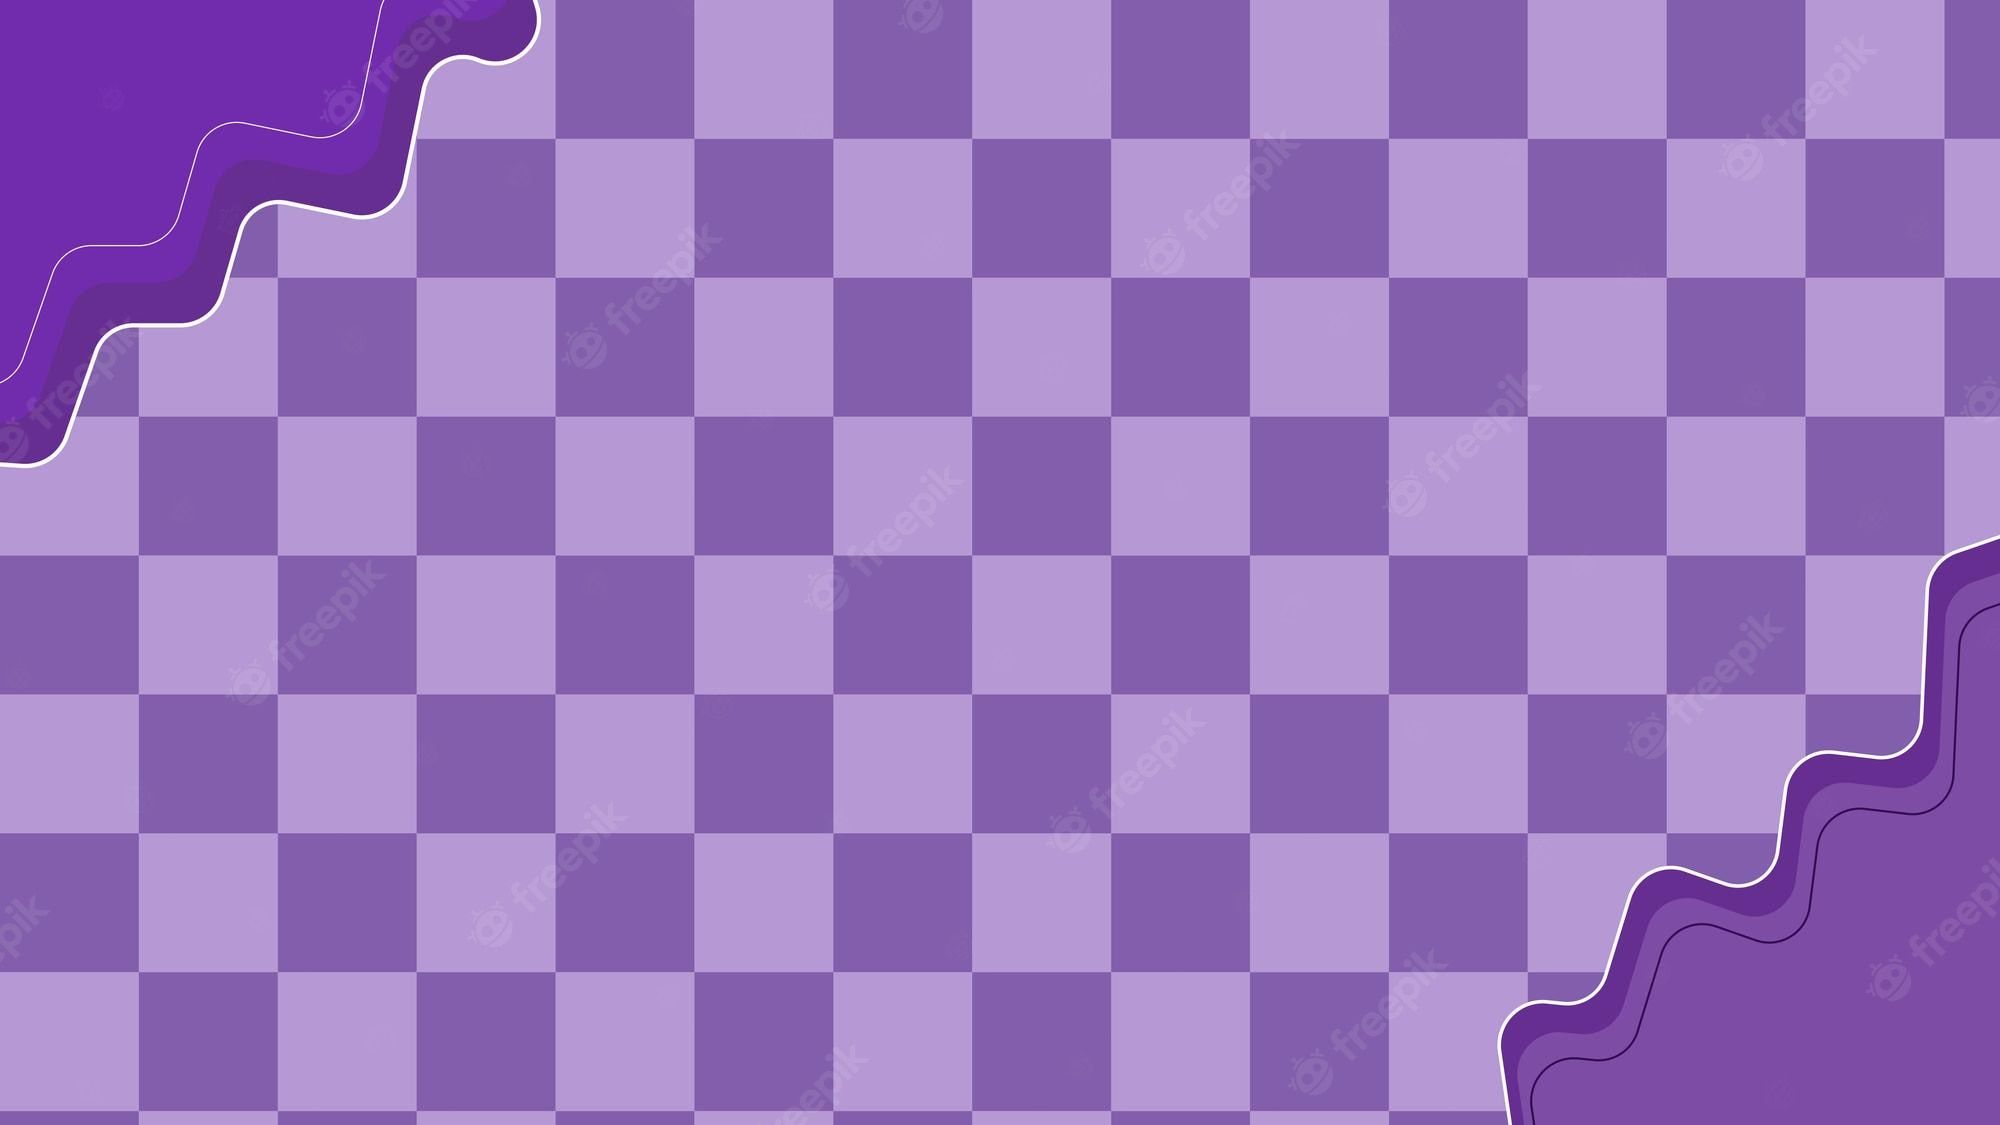 Premium Vector. Aesthetic cute purple violet checkers checkerboard gingham plaid tartan pattern background perfect for wallpaper backdrop postcard background